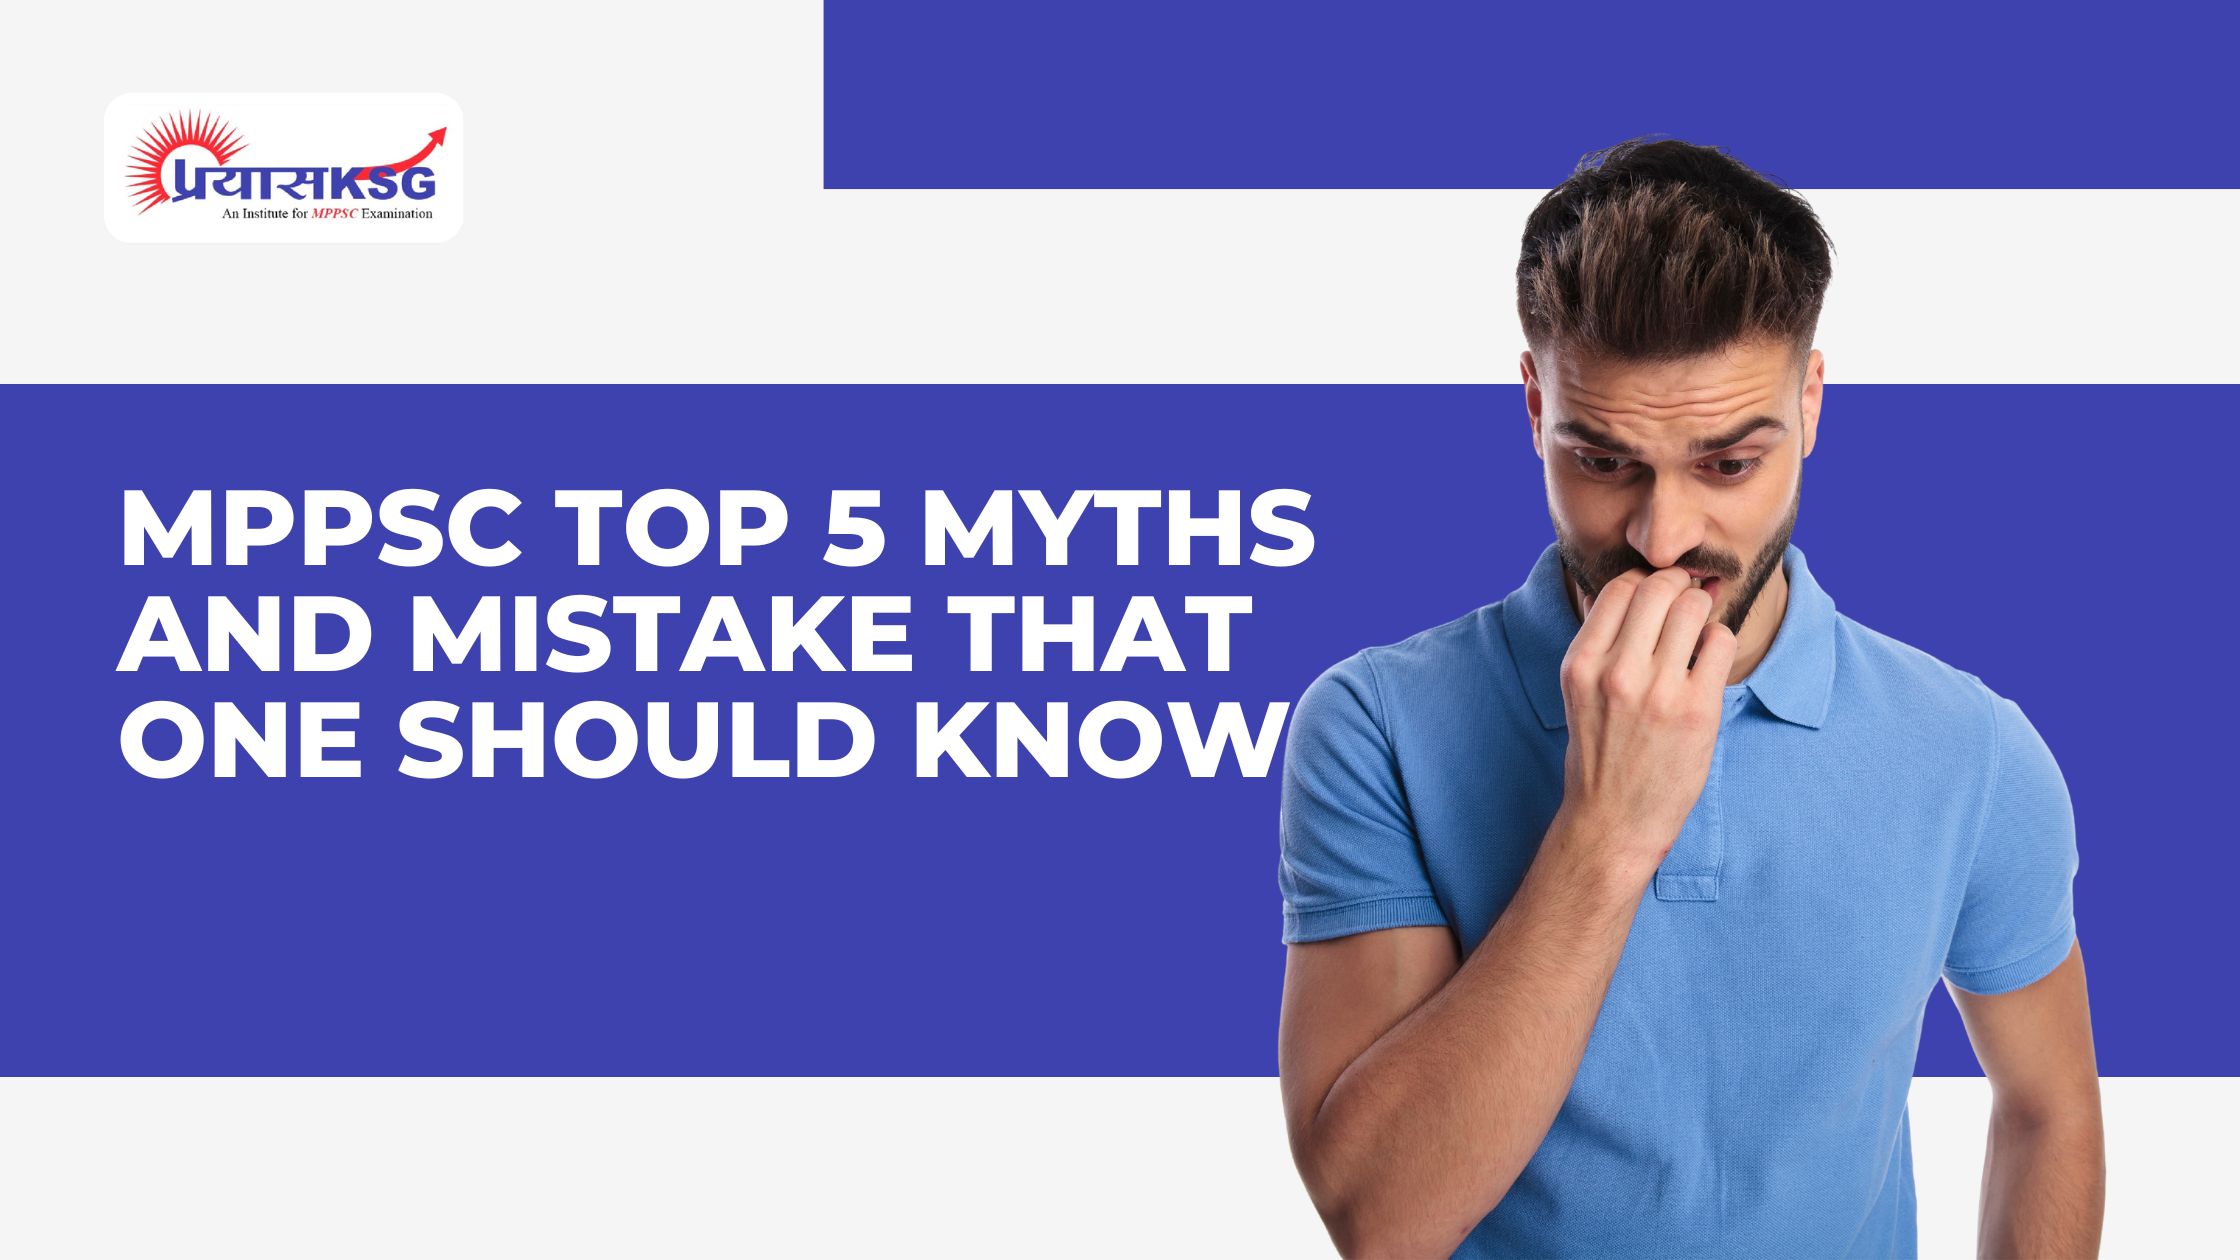 MPPSC Top 5 Myths and mistake that one should know